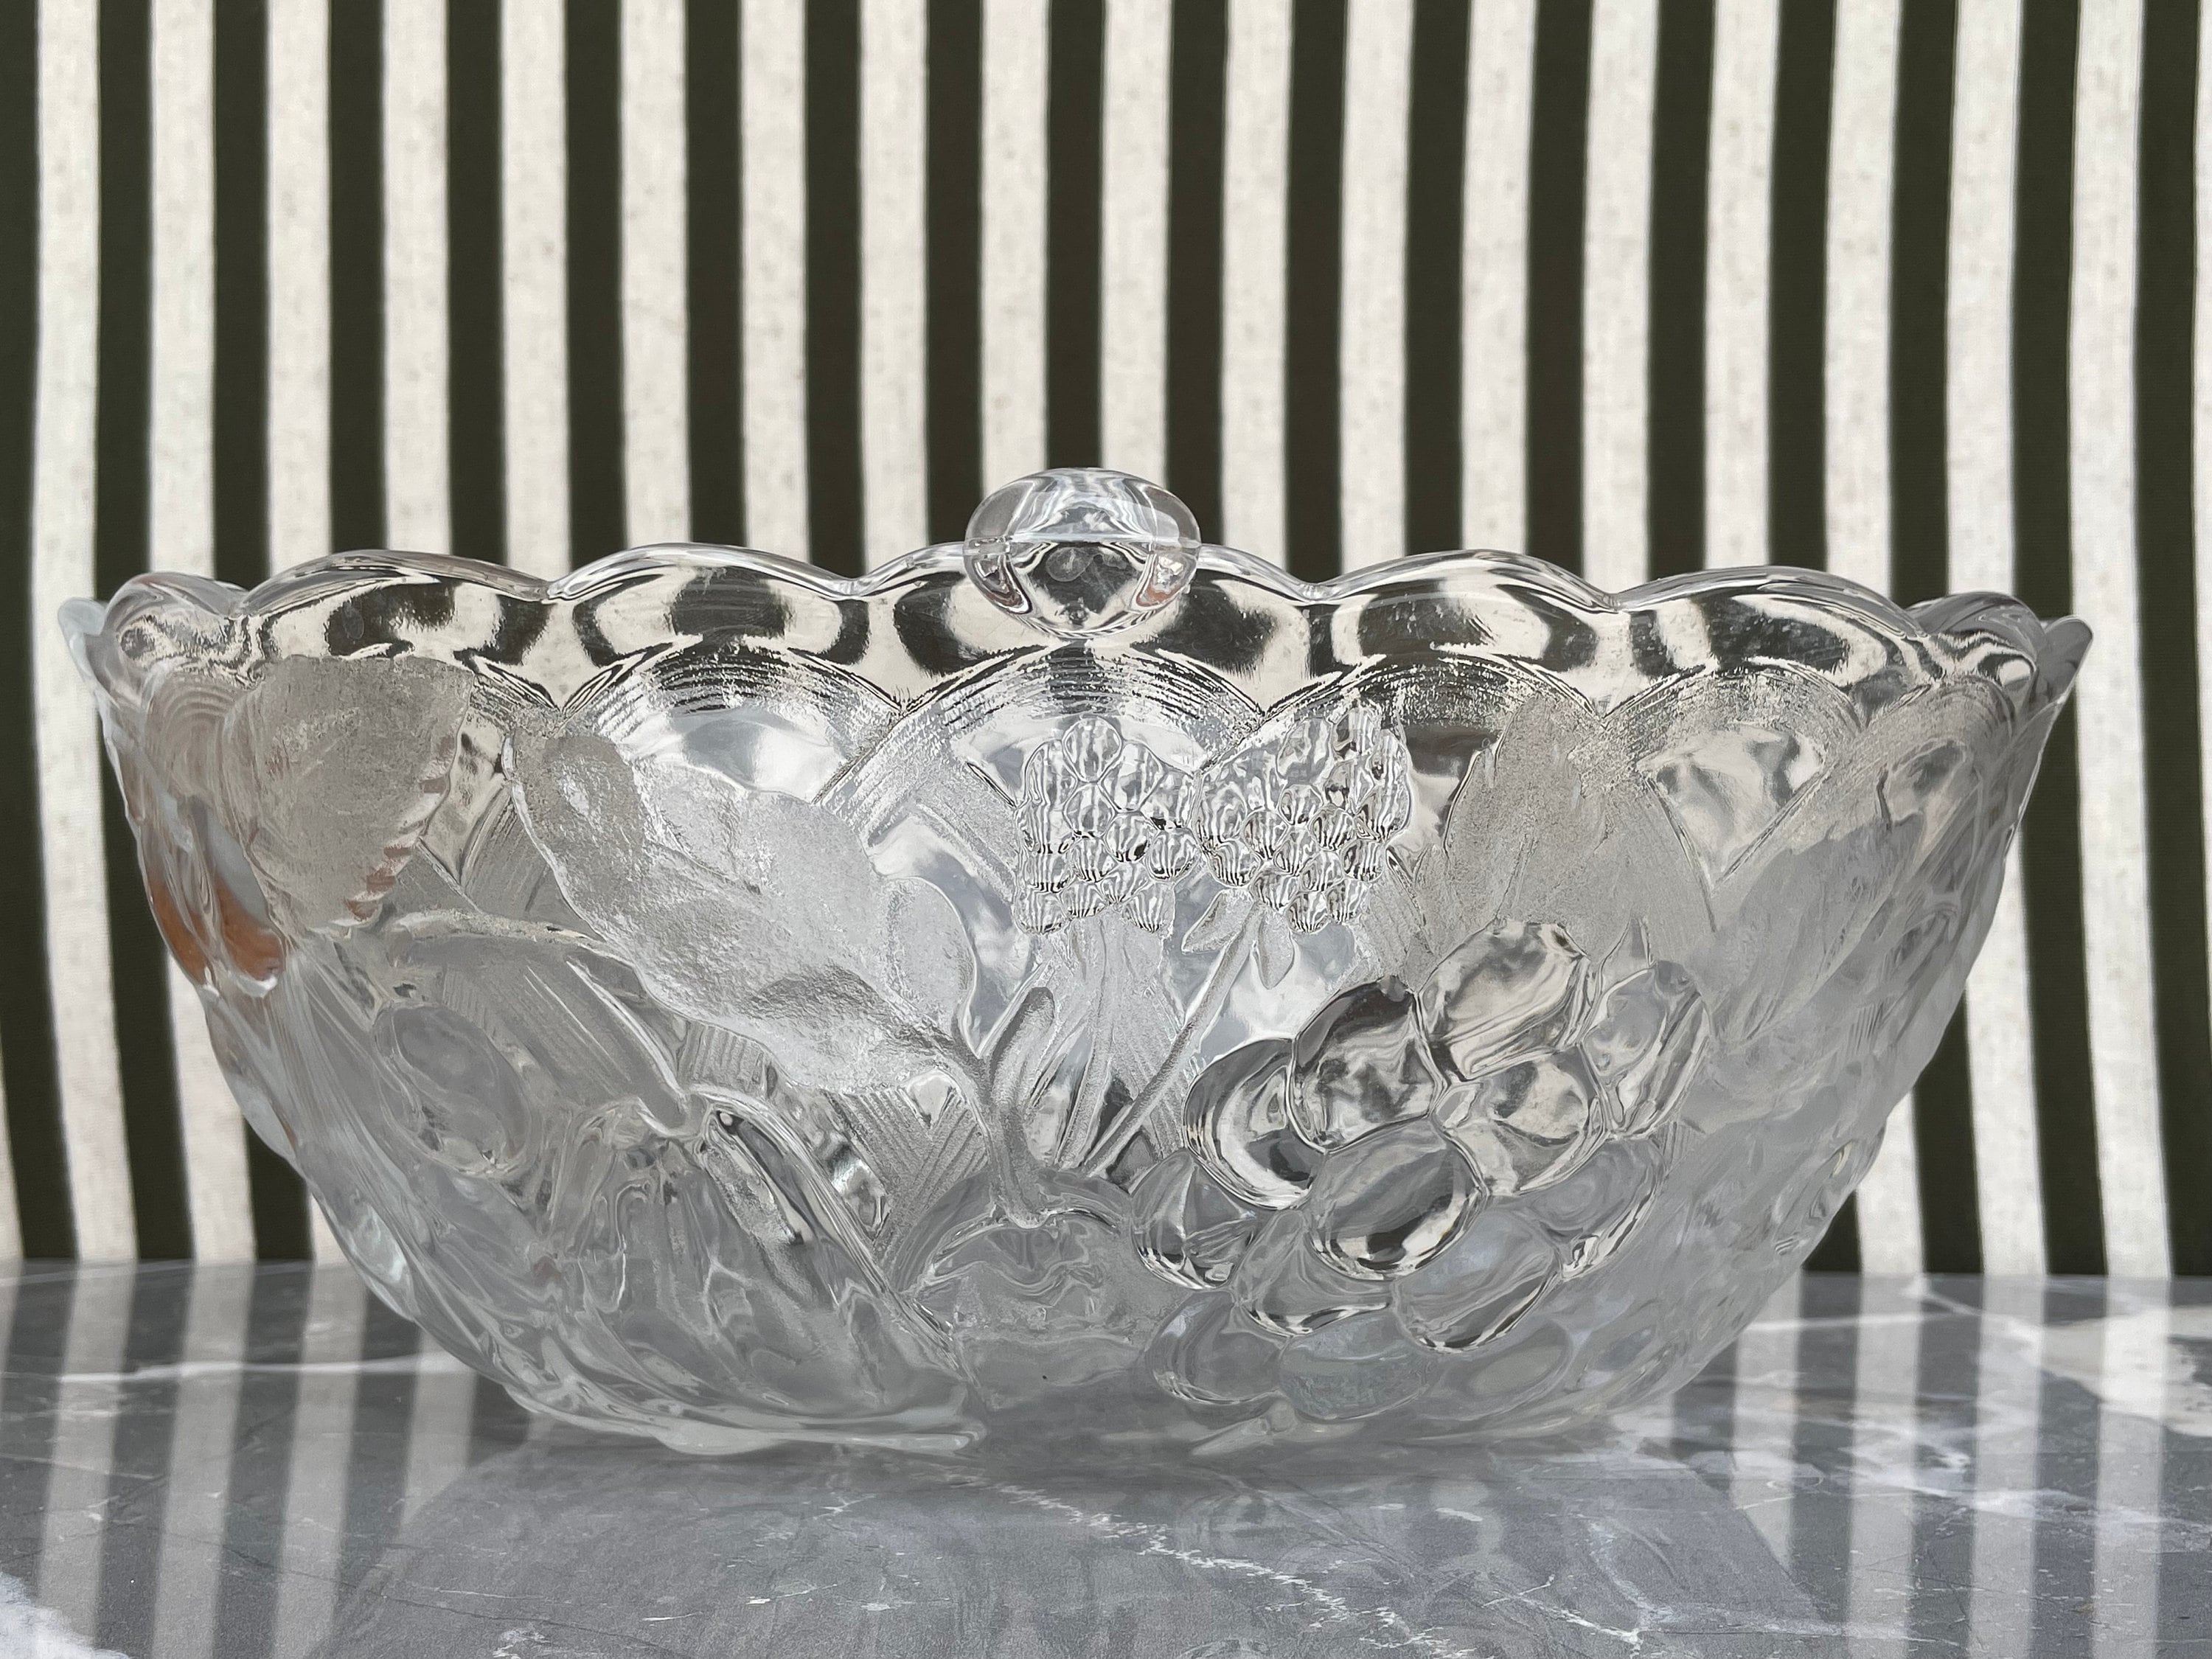 Stock Fast Delivery Glass Bowl High White Glass Serving Bowl Salad